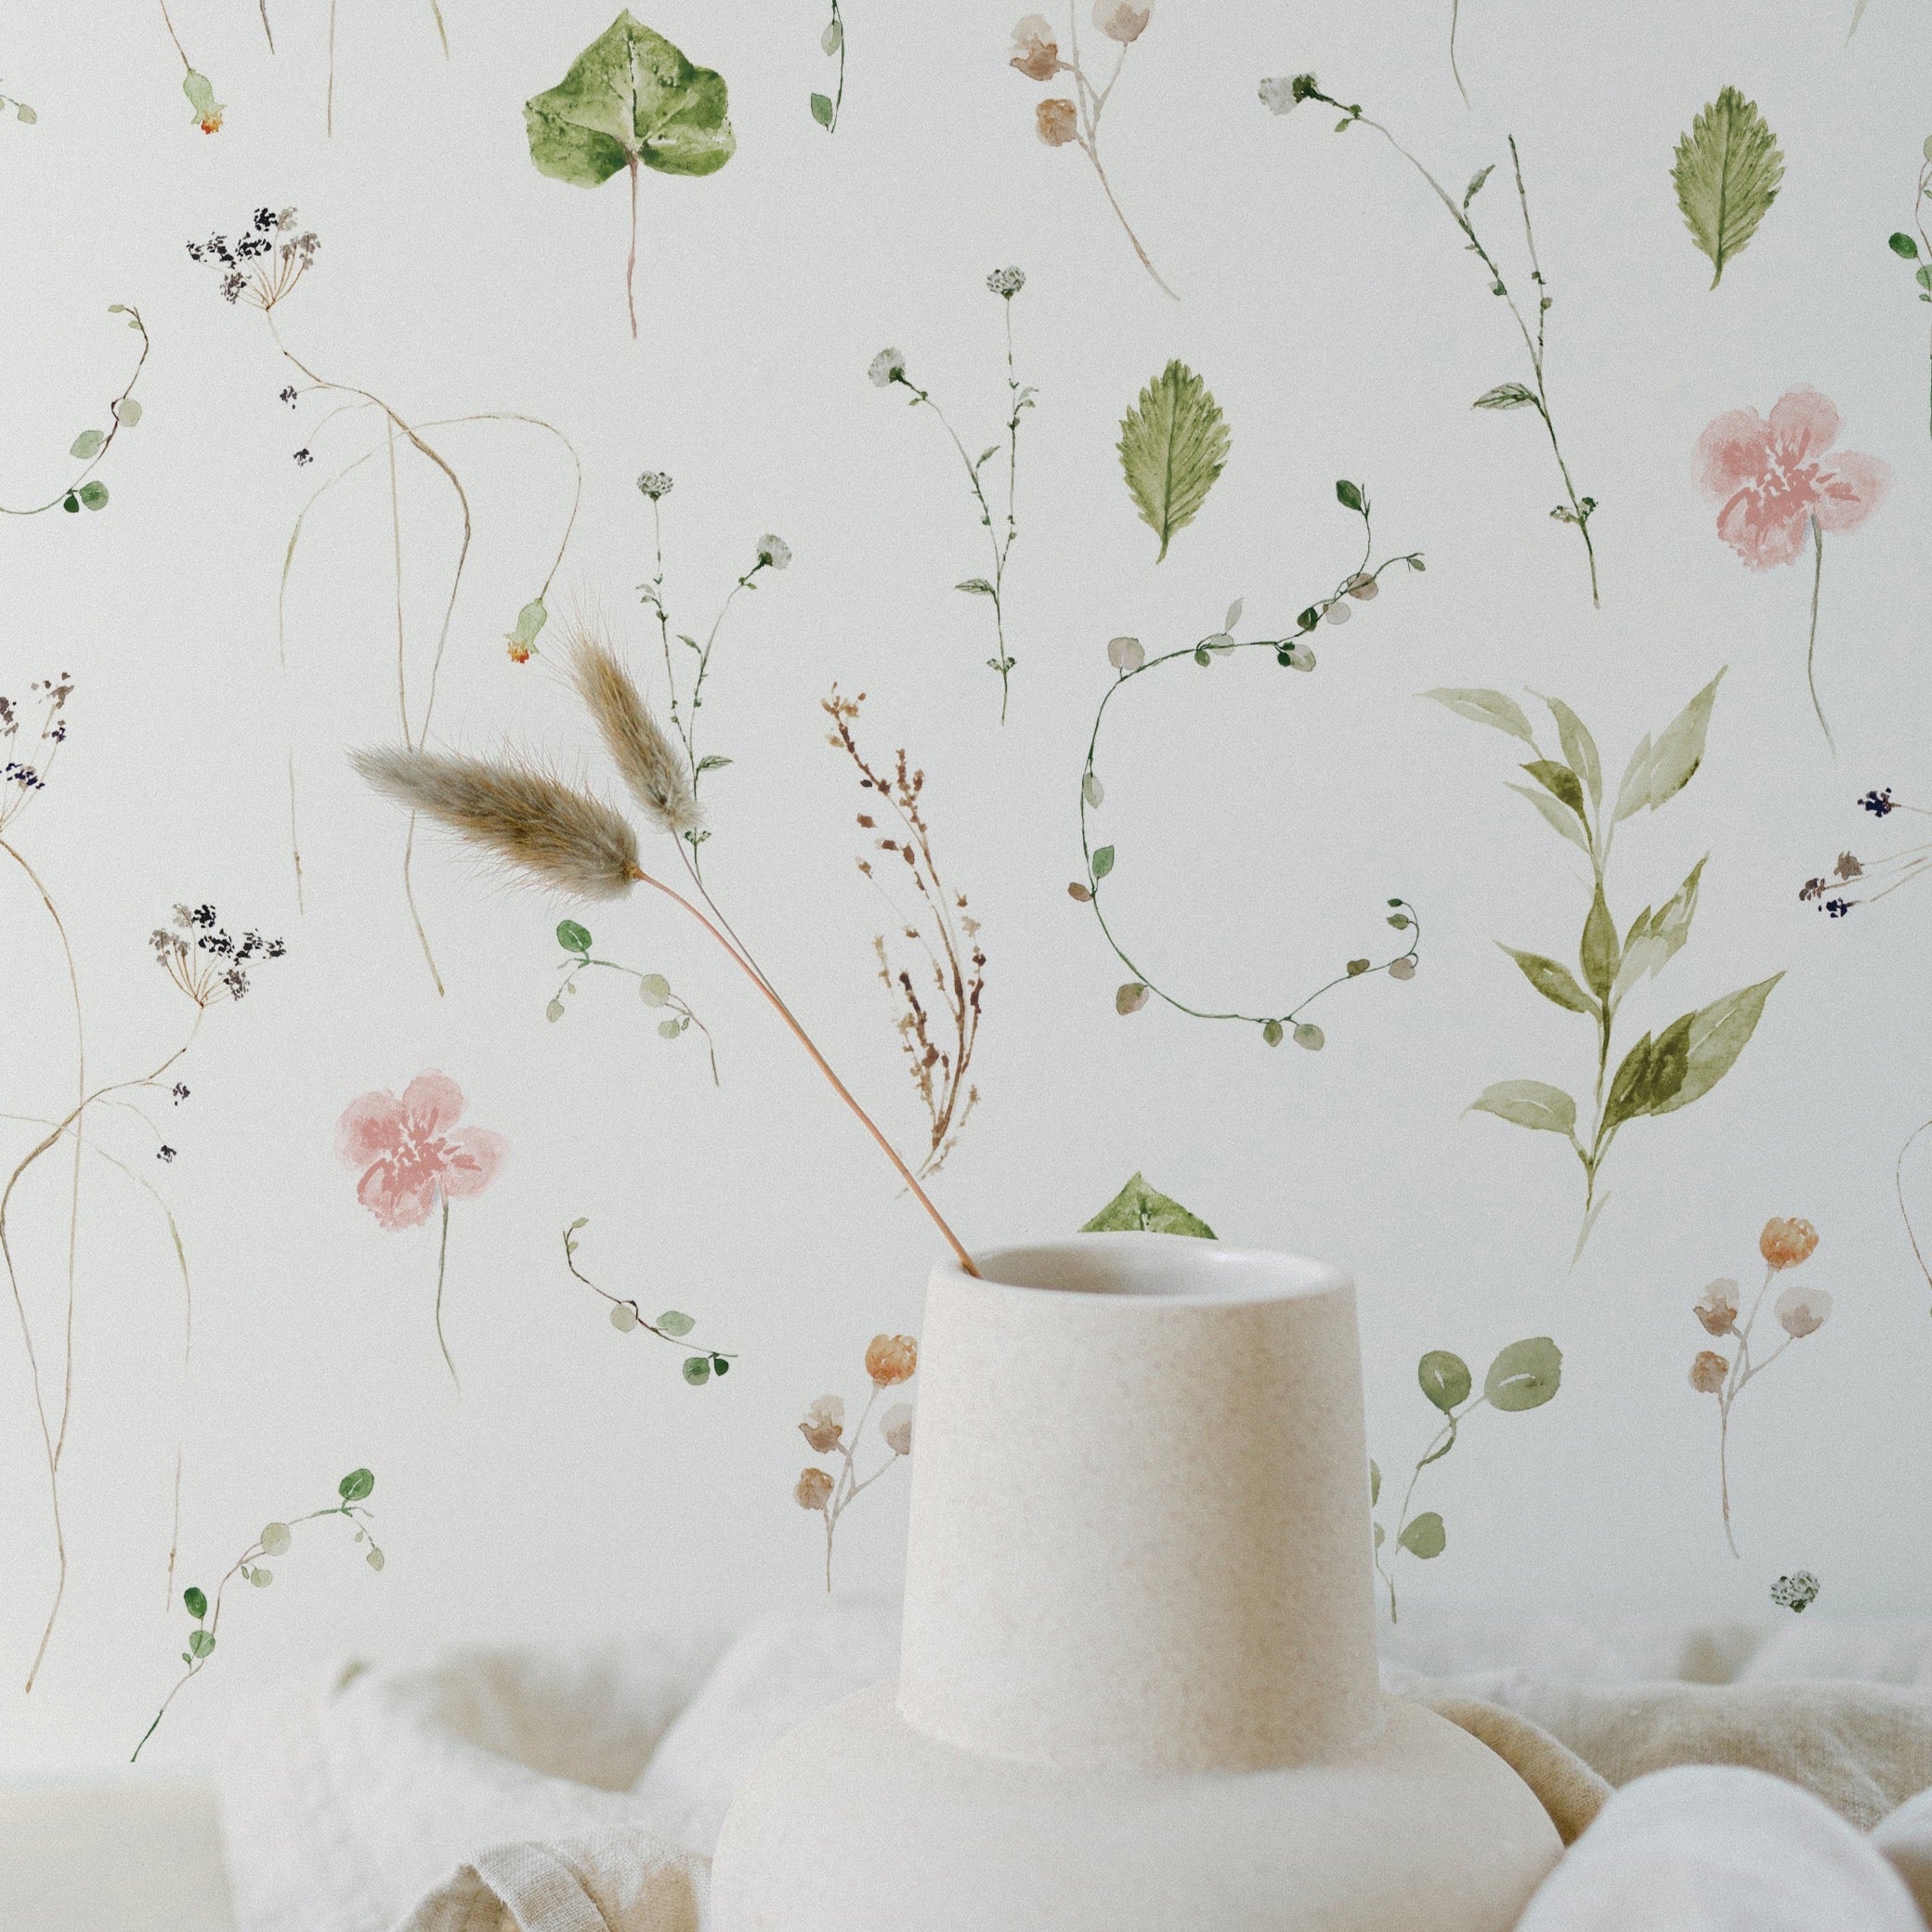 A serene and artistic display featuring the Modern Watercolour Floral Wallpaper in Dusty Pink as a backdrop. The wallpaper showcases a delicate array of watercolor flowers and foliage in shades of pink, green, and beige, giving the impression of a hand-painted wall. A sculptural vase in front of the wallpaper adds to the soft and organic feel of the setting.